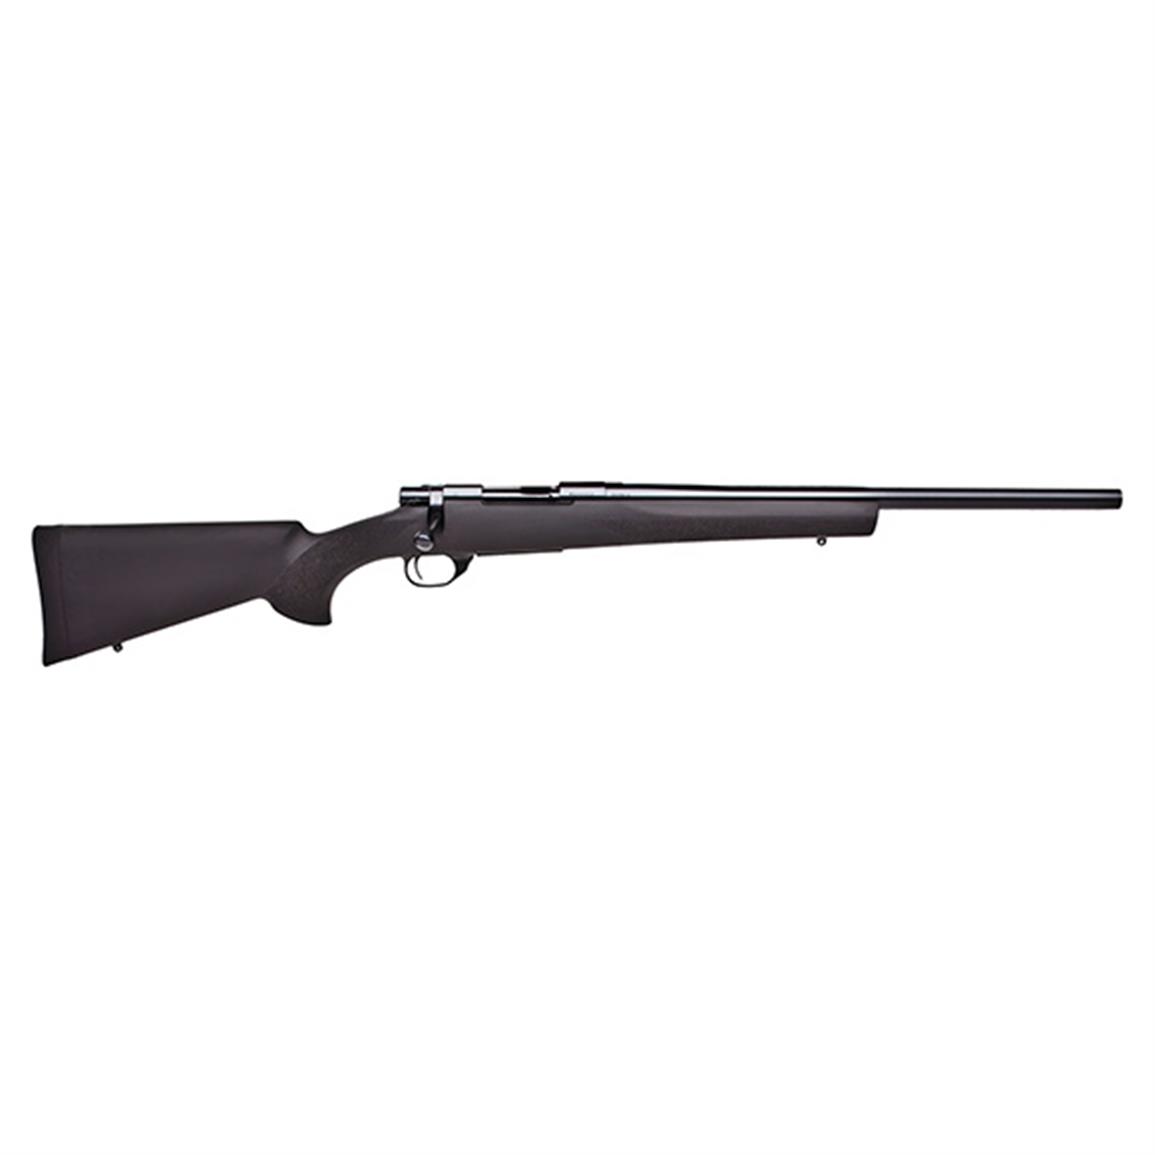 LSI Howa Hogue, Bolt Action, .308 Winchester, Threaded 20" Heavy Barrel, 5 1 Rounds